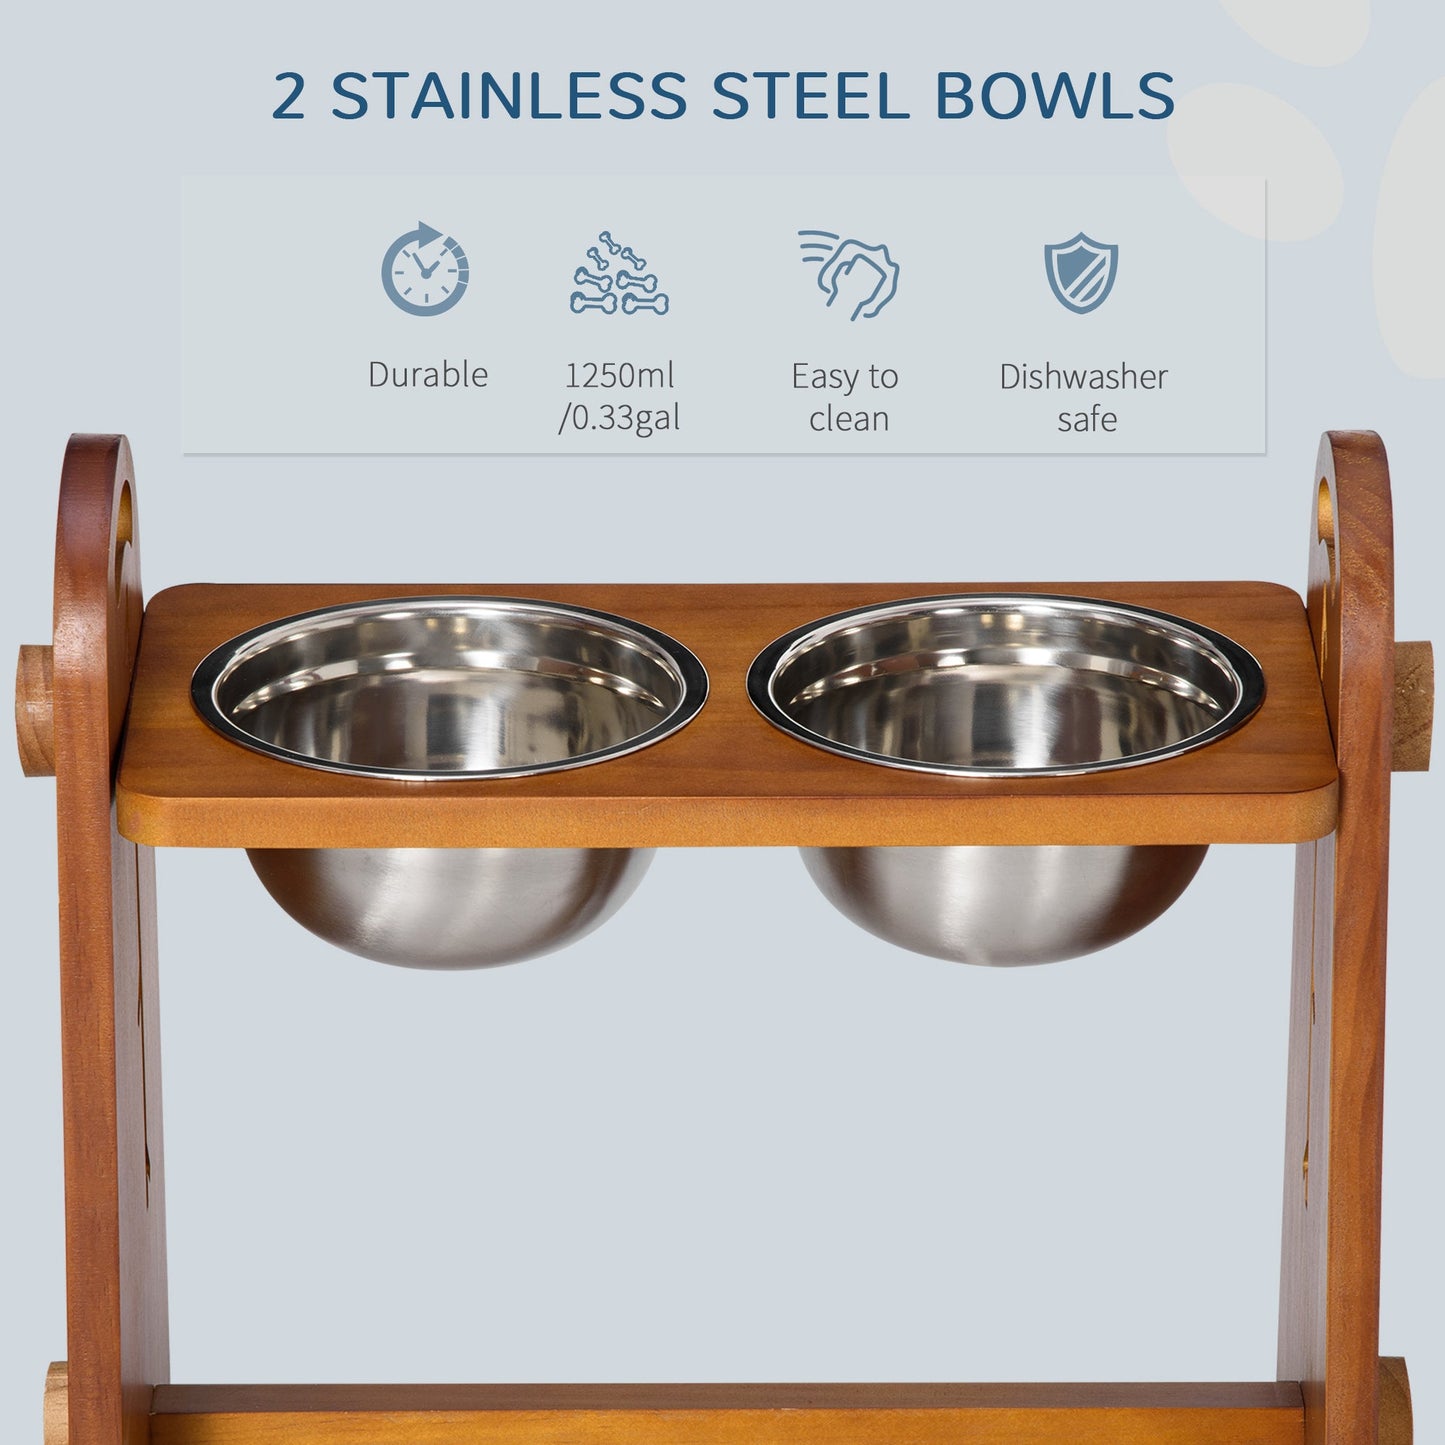 Elevated Dog Bowls Adjustable Pet Feeder Raised Dog Bowl with 2 Removable Stainless Steel Bowls for S, M, L, XL Dogs, Brown at Gallery Canada